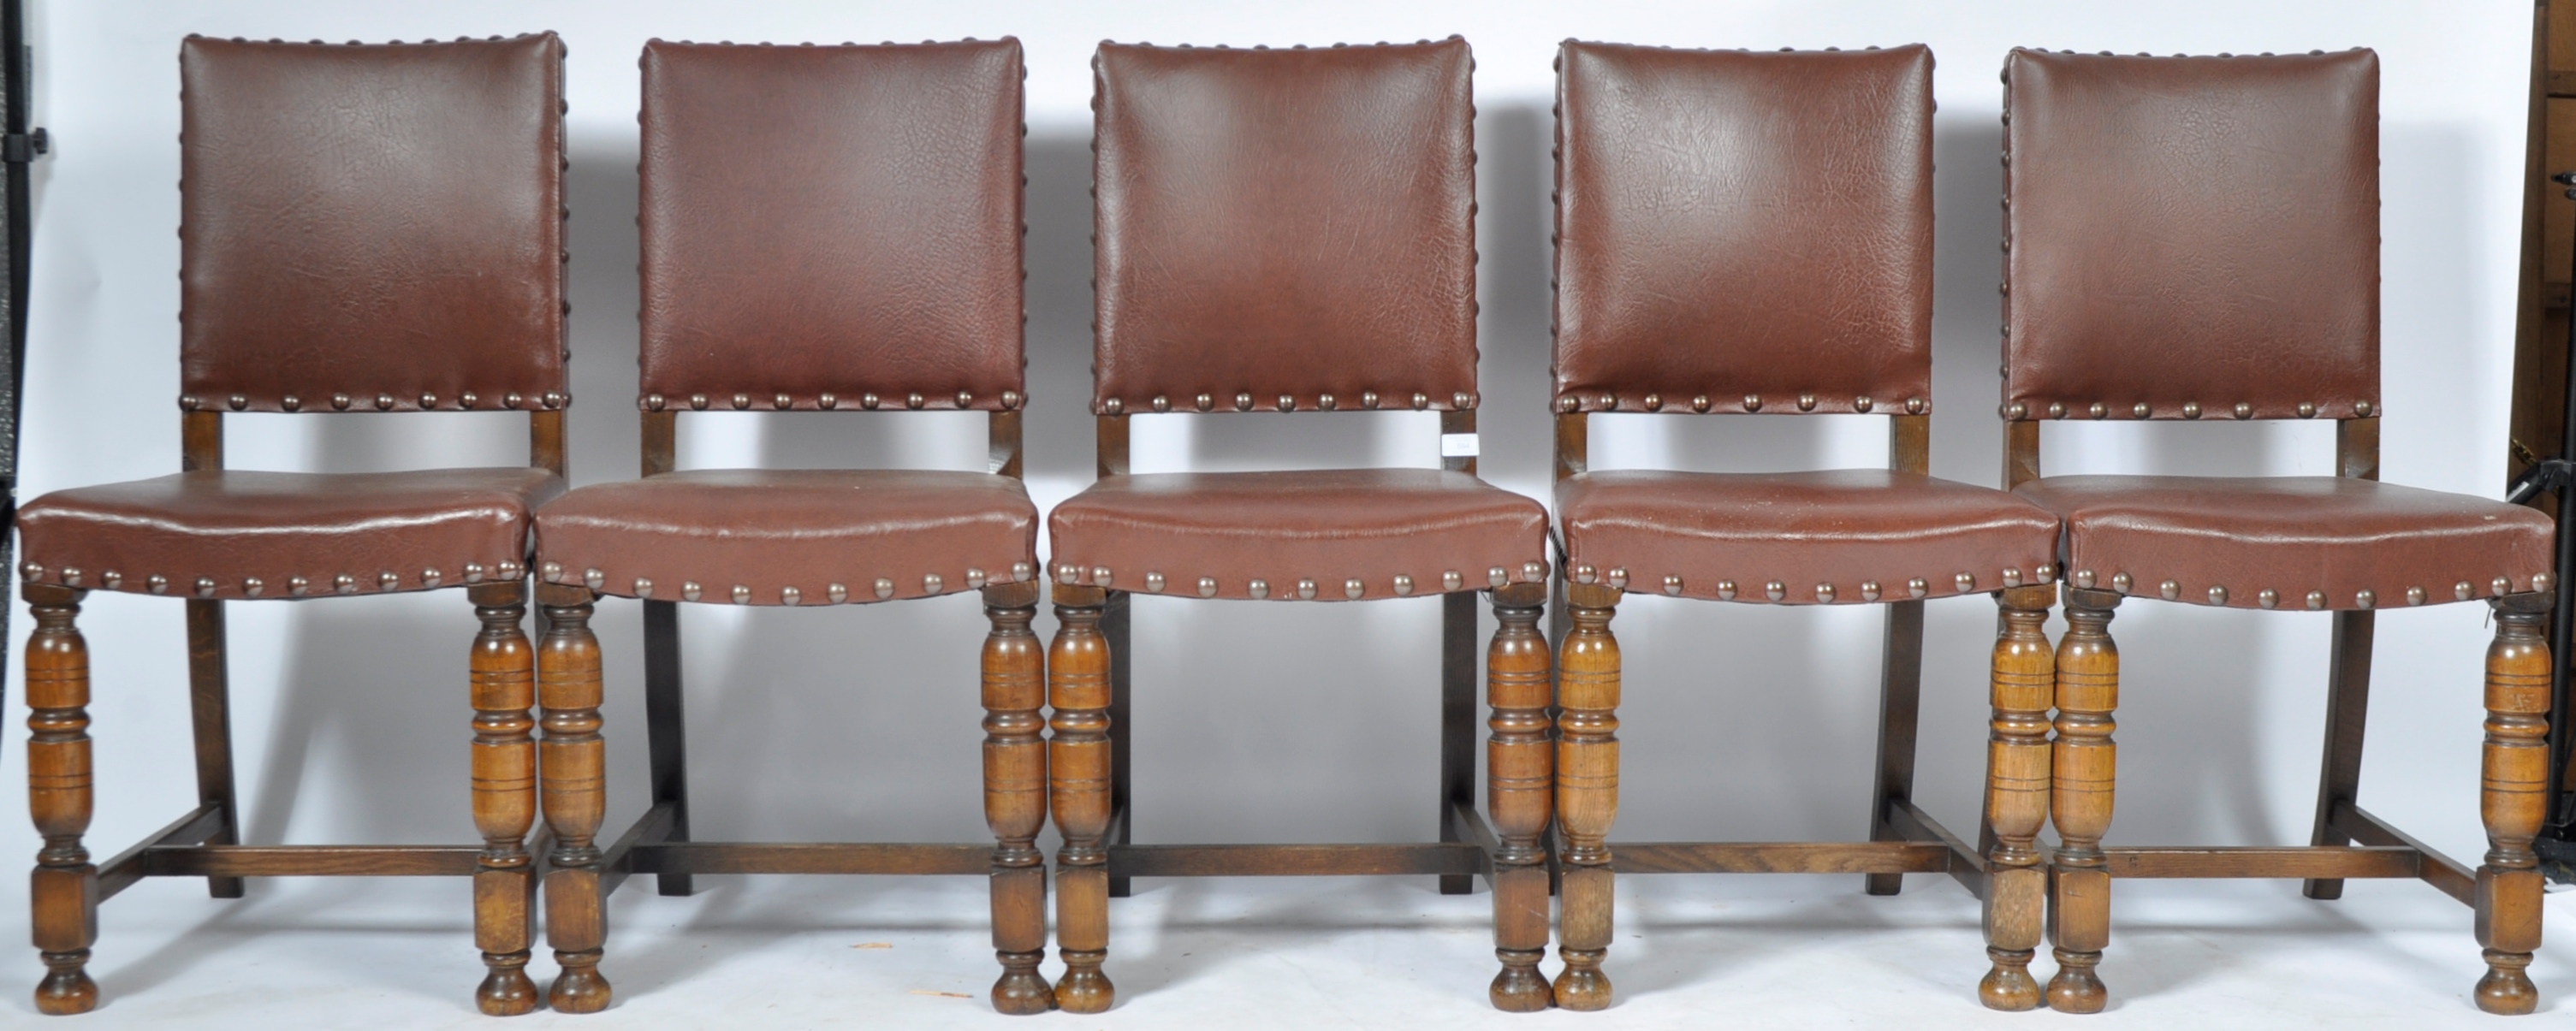 MATCHING SET OF TEN OAK AND LEATHERETTE DINING CHAIRS - Image 7 of 11